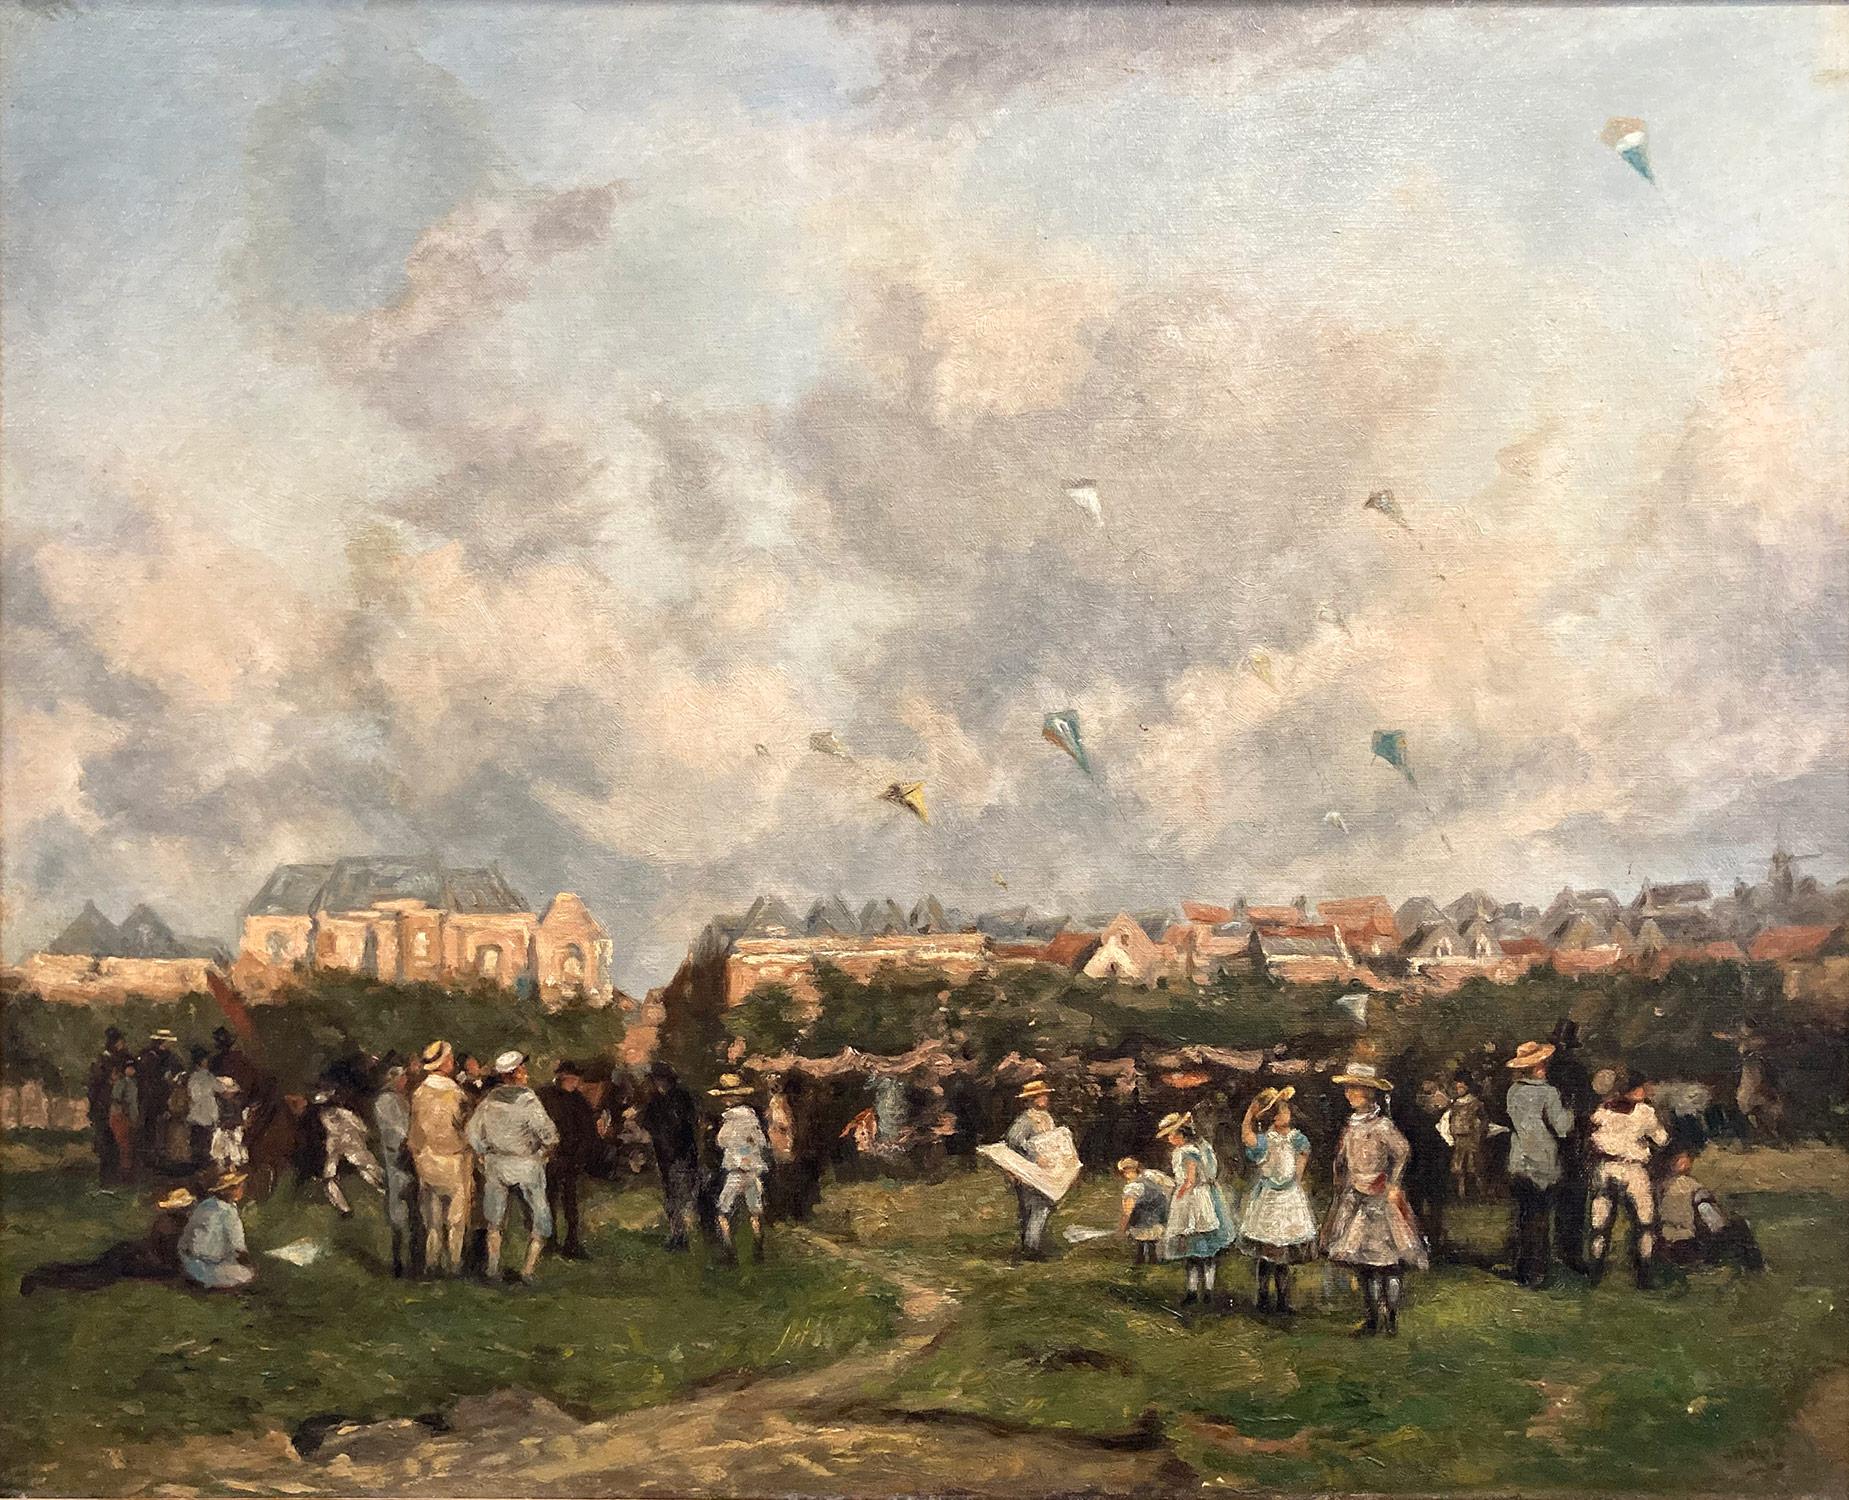 A masterful oil painting depicting a view of the British Country Side with figures flying kites on a spectacular day. A rich landscape depicting a typical 20th century scene from daily life, a peaceful emotion is felt through out. This piece is an